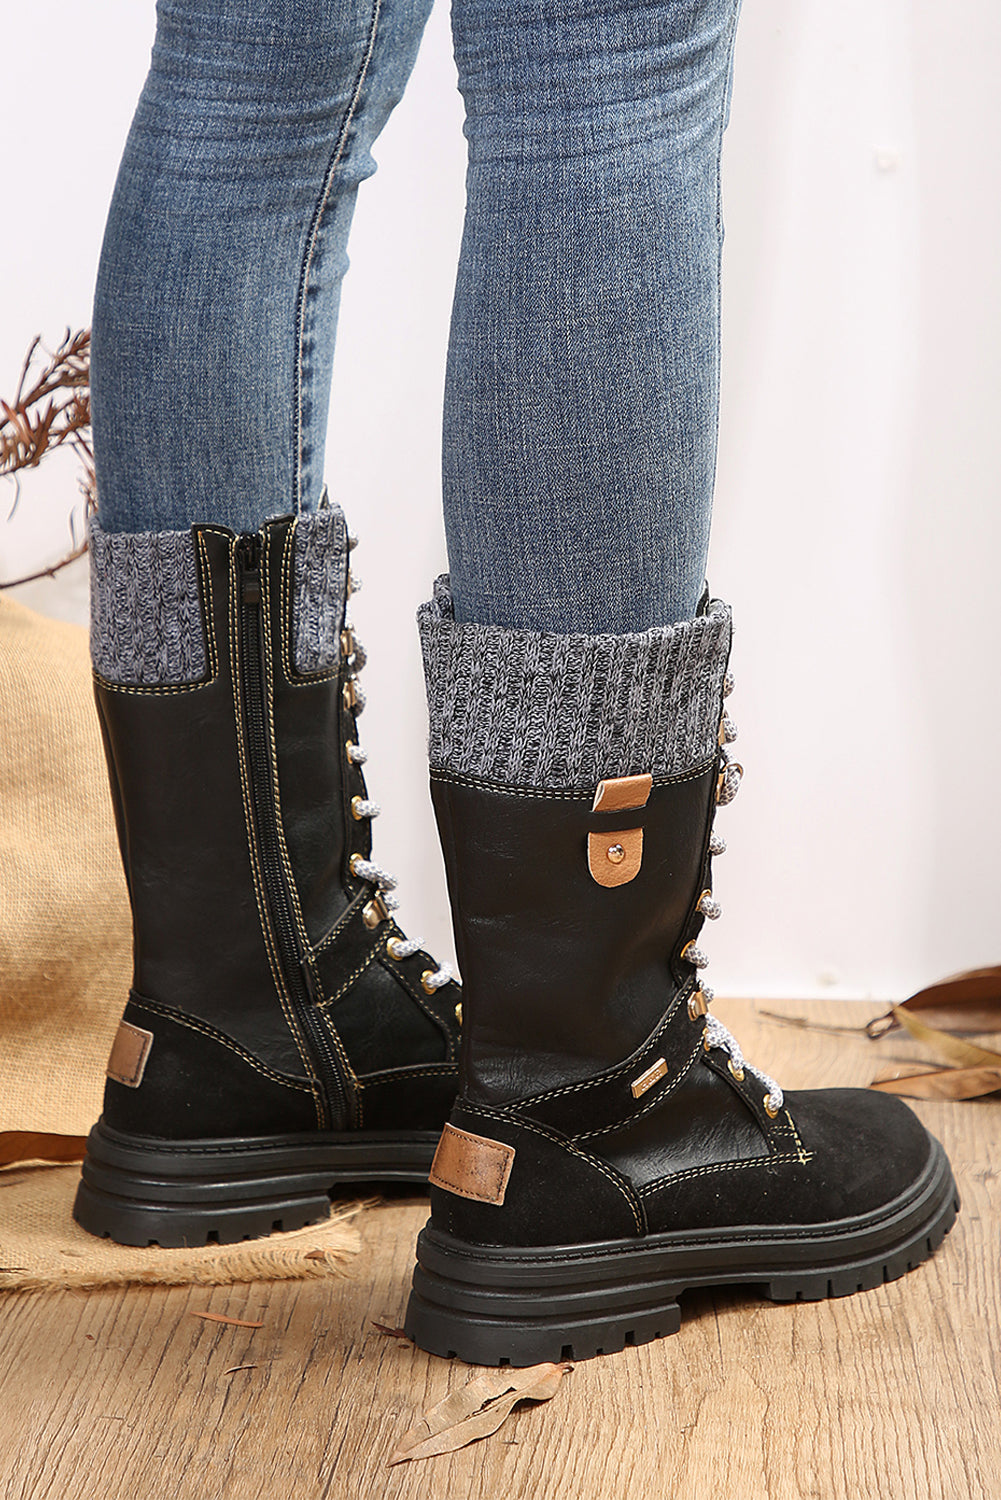 Black Knit Patchwork Lace Up Leather Boots